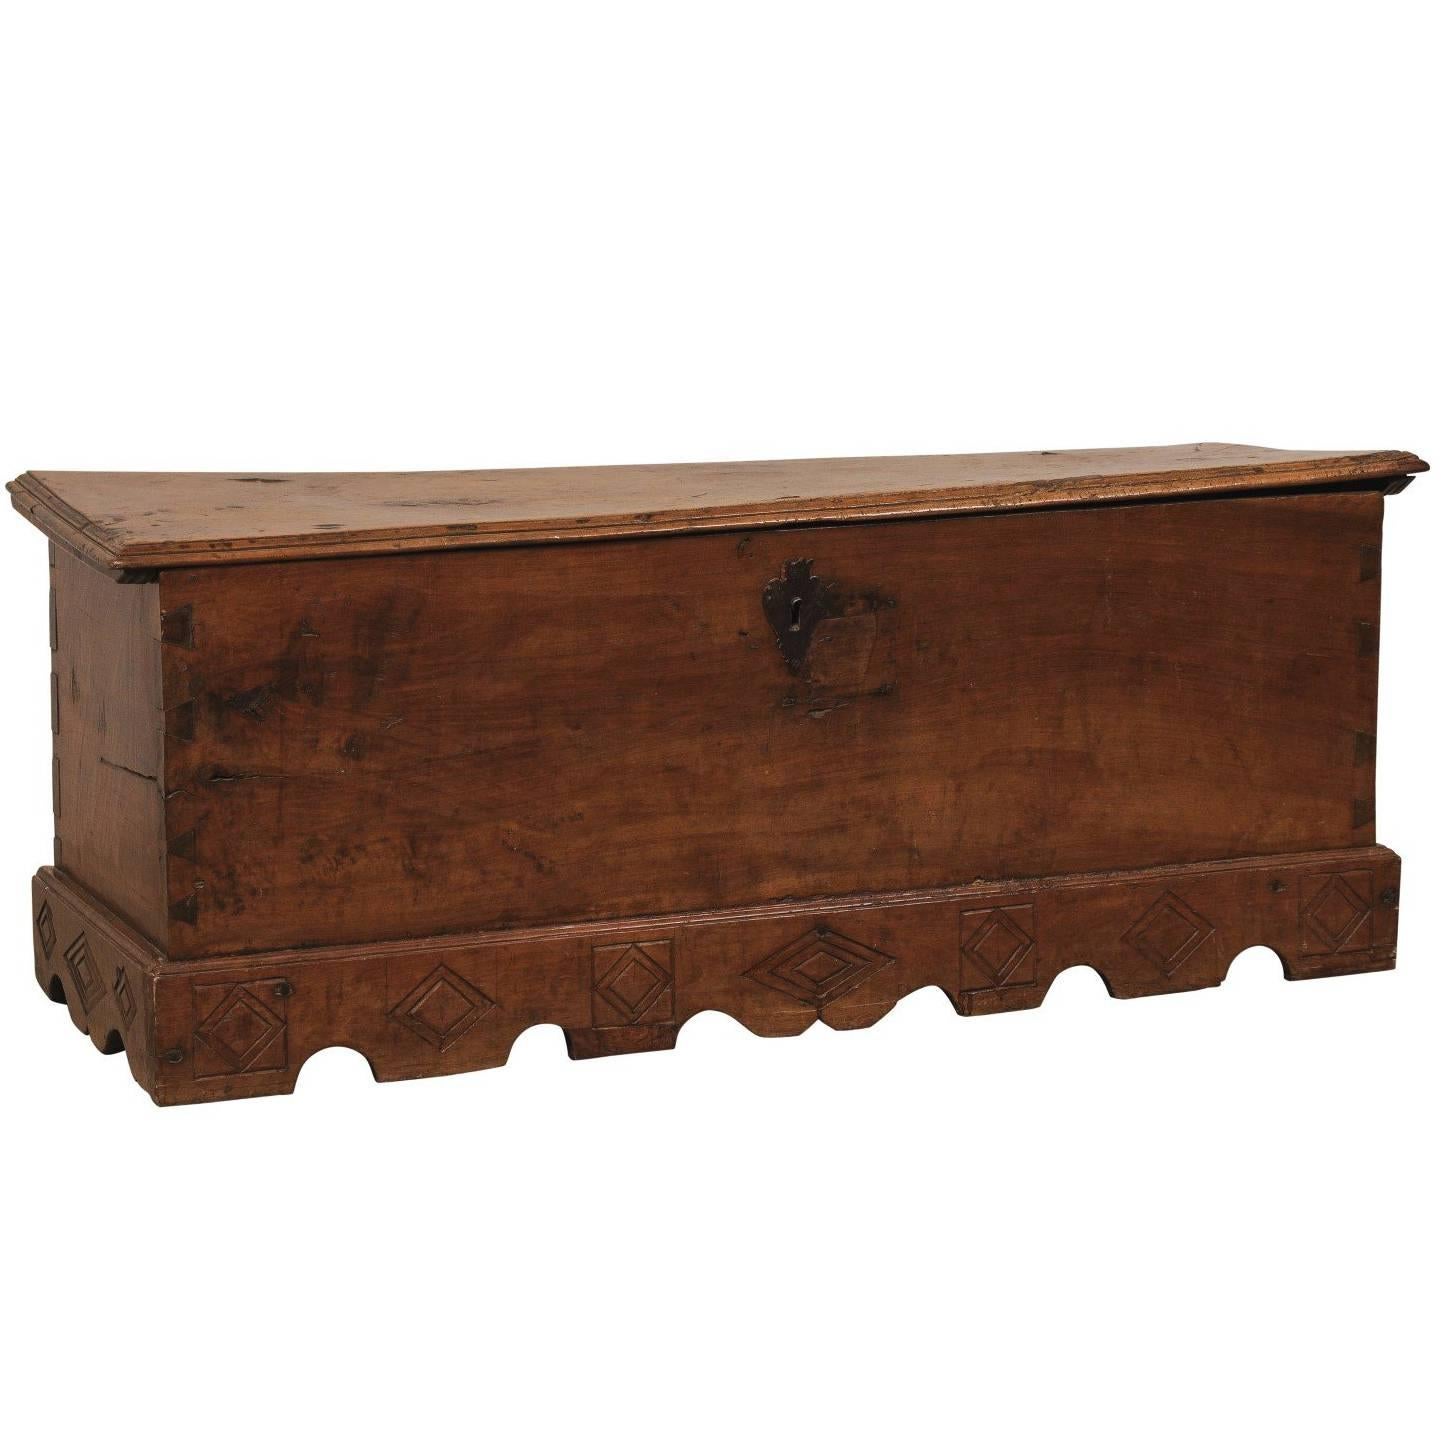 Spanish 18th Century Large-Size Carved-Wood Coffer or Trunk with Scalloped Skirt